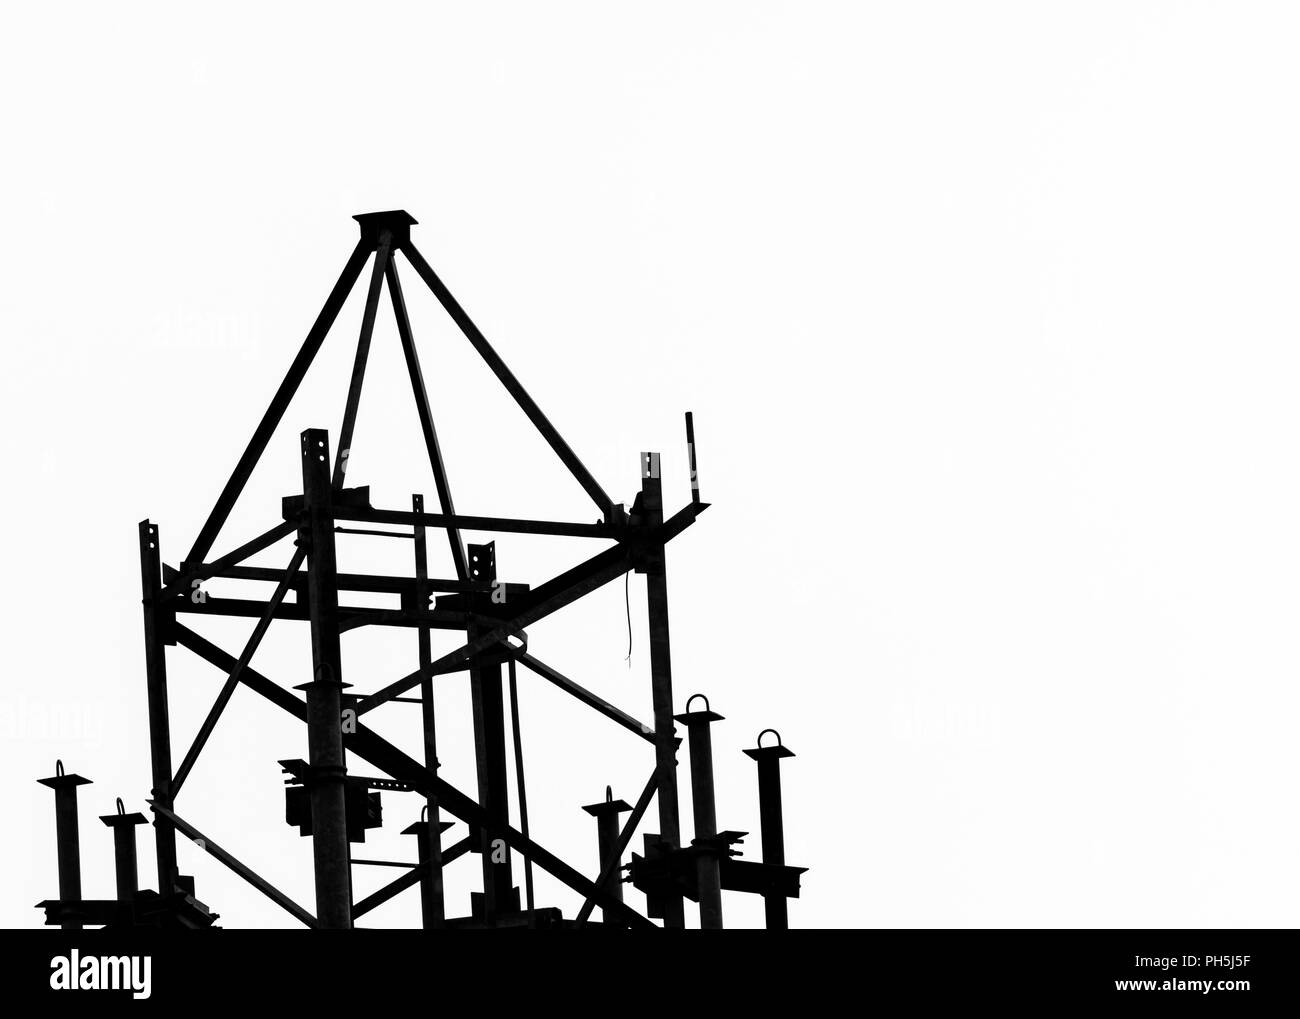 The Silhouette of a Radio Tower Stock Photo